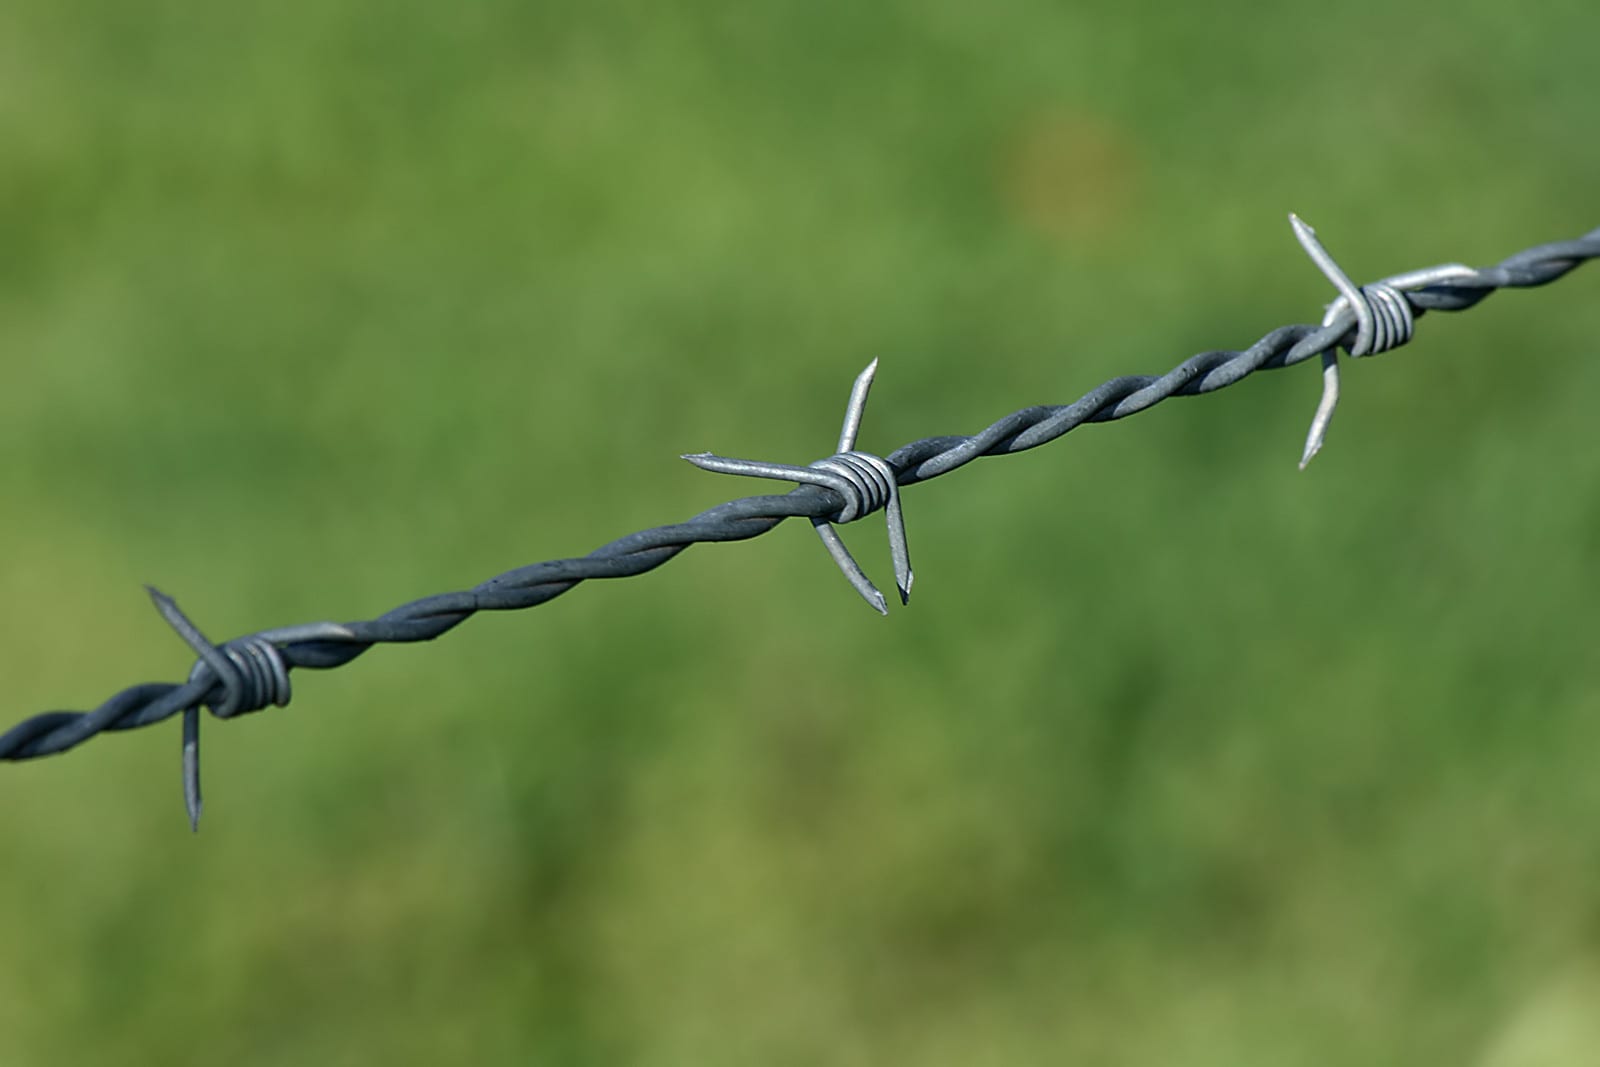 barbed wire 6